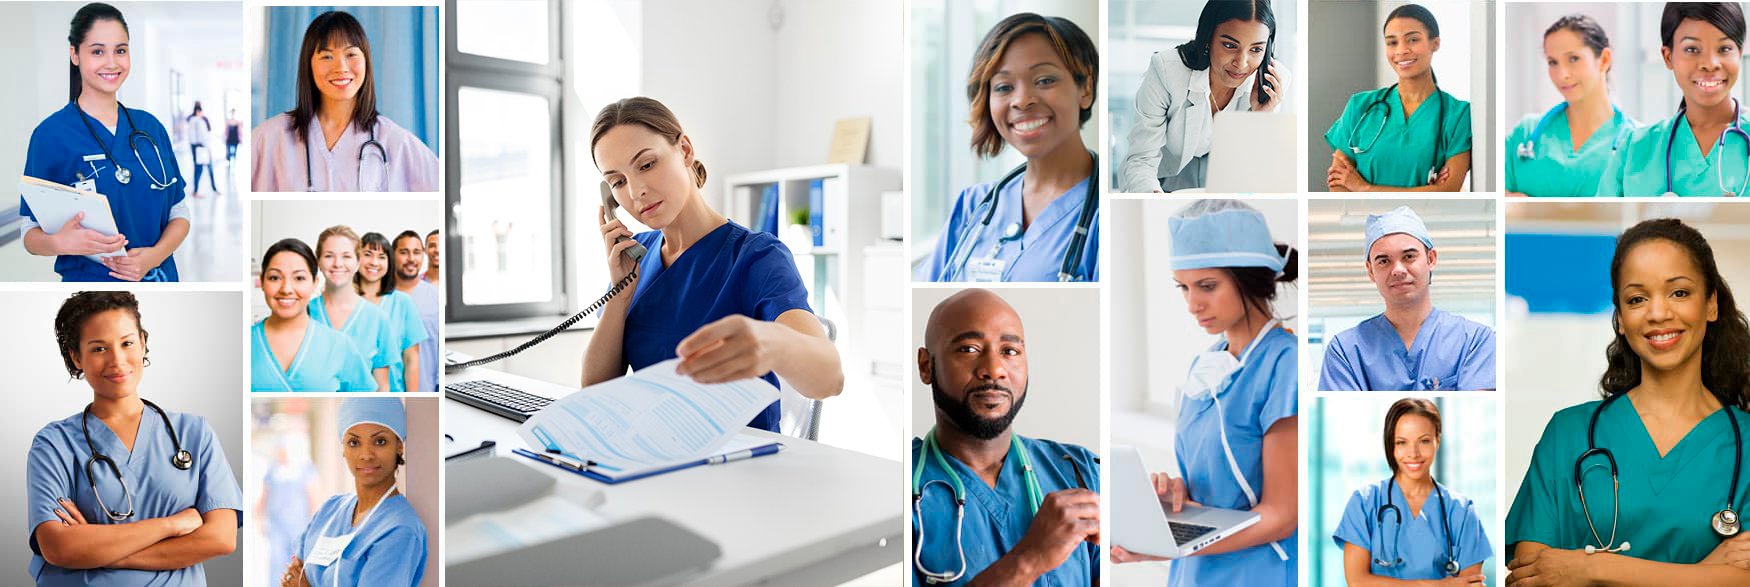 A collage of doctors and nurses answering the phone, talking to each other, looking straight forward | vcpstaff.com | Healthcare Staffing